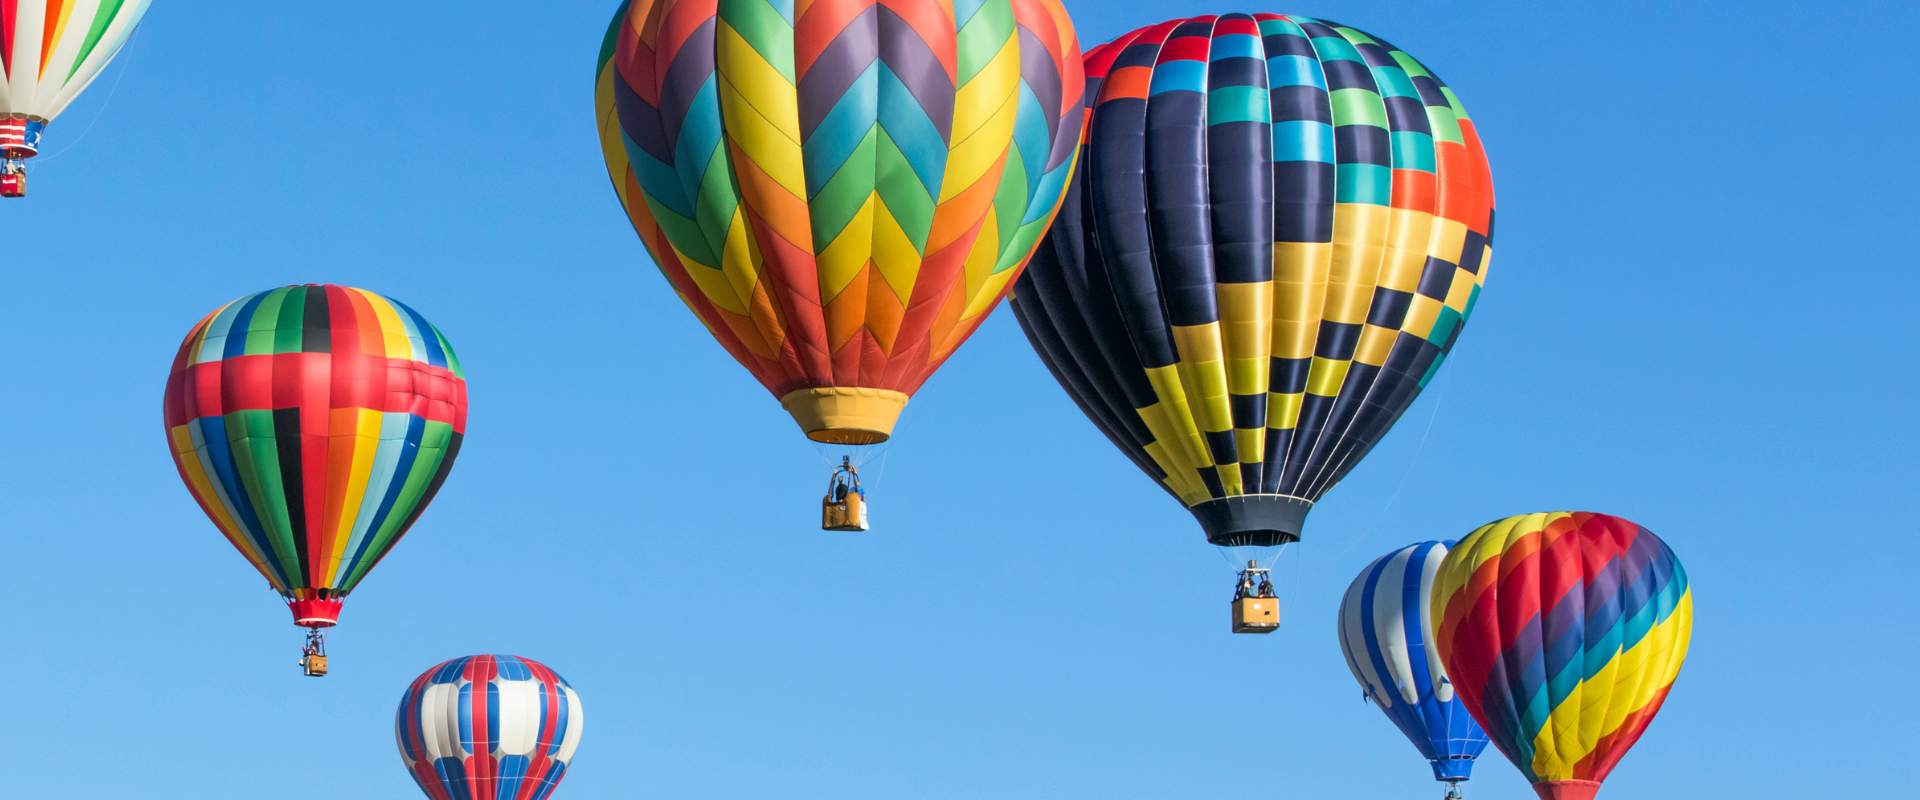 Colourful hot air balloons are rising up on the blue sky. Picture is taken from a distanced hot air balloon.